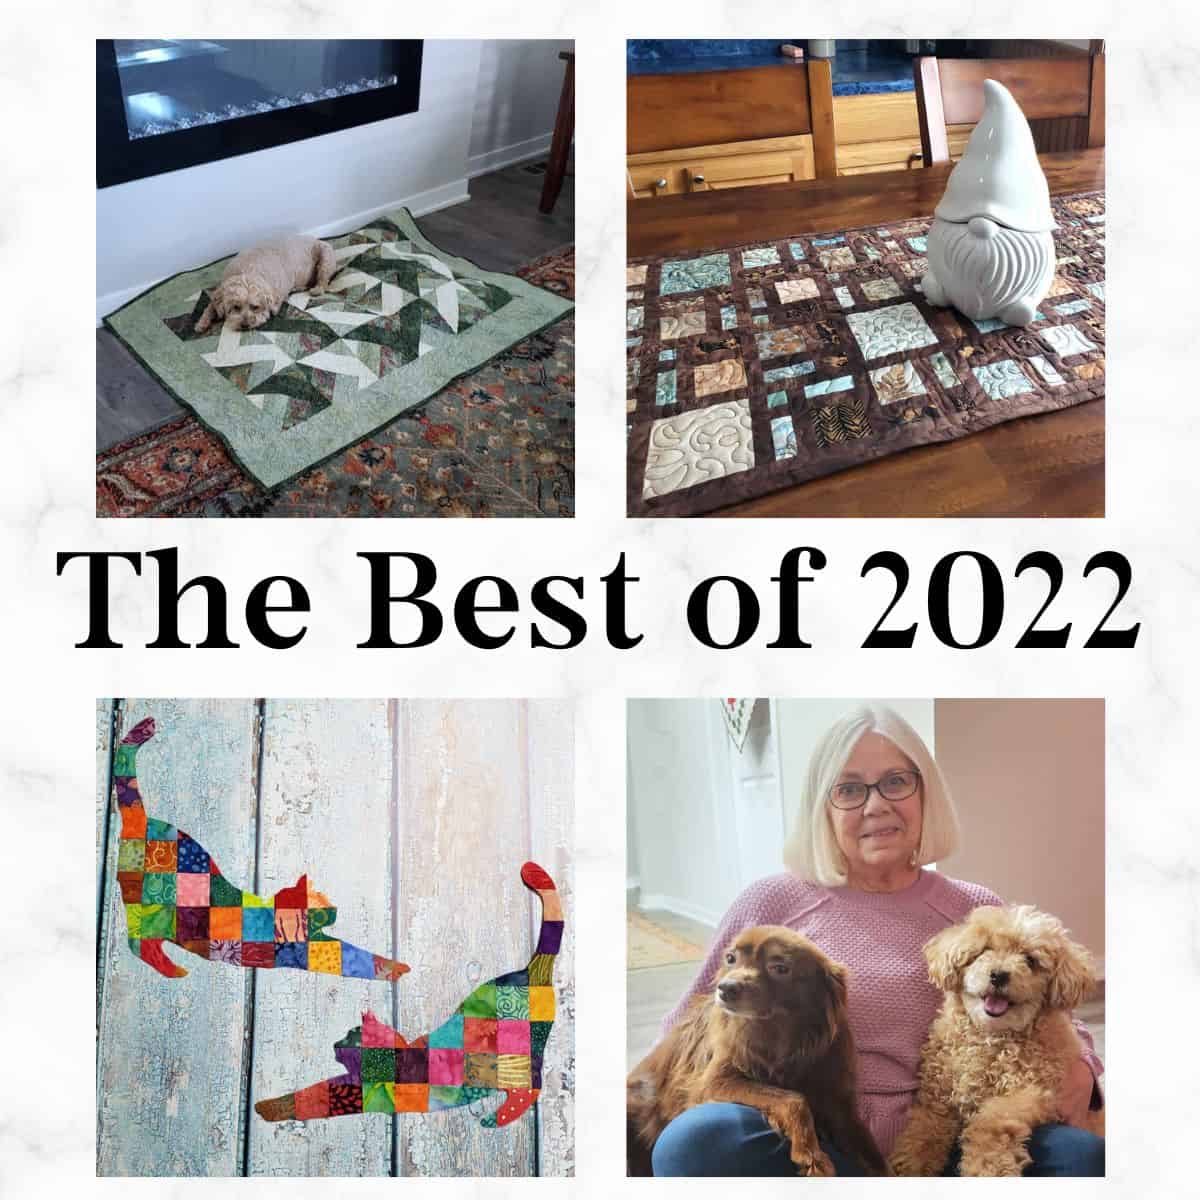 The Best of 2022